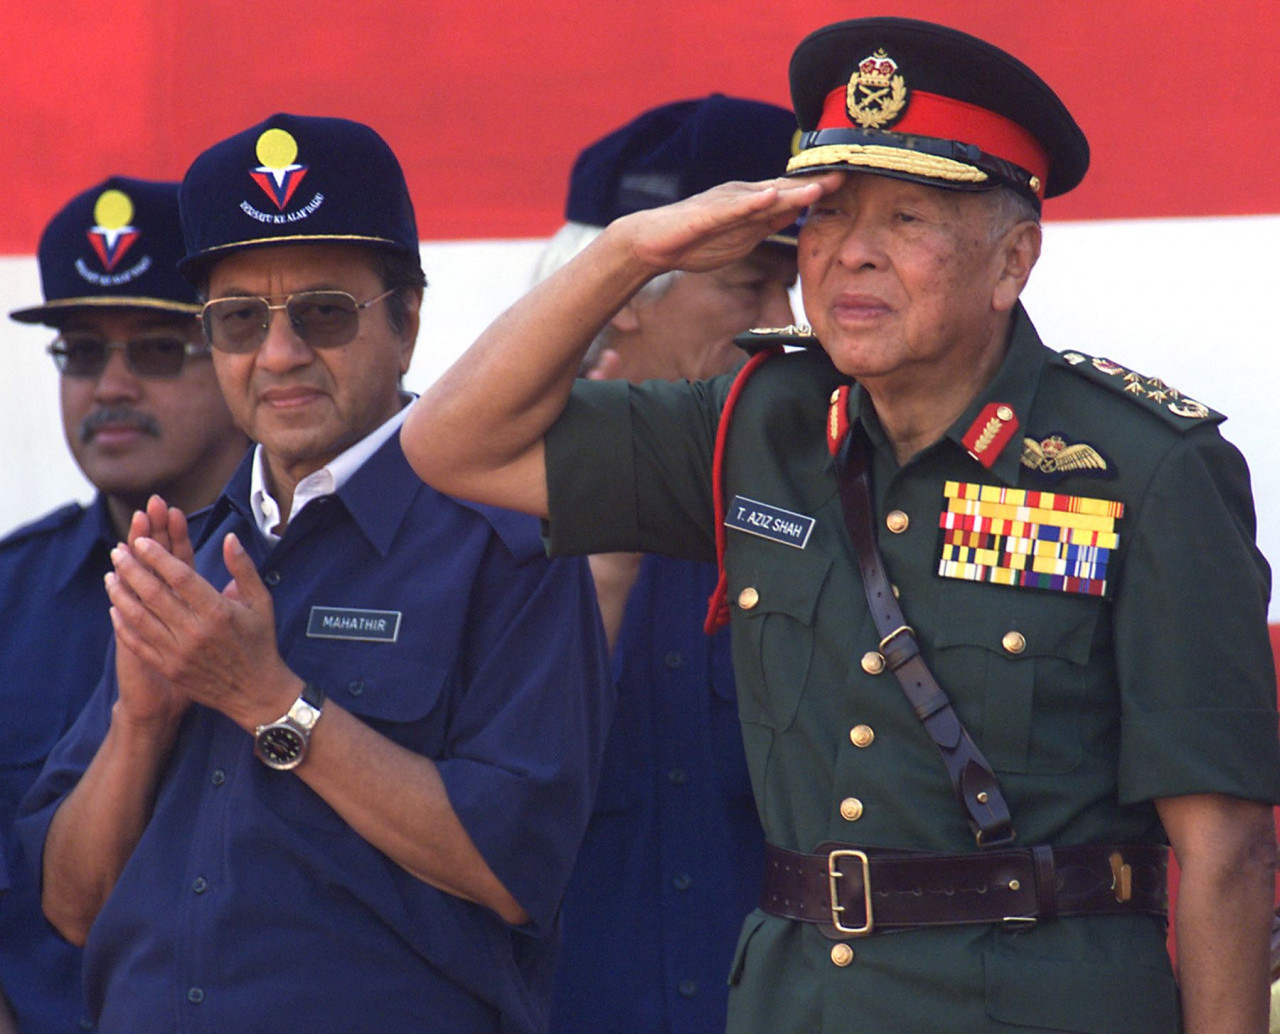 The late Malaysian King Salahuddin Abdul Aziz Shah (right) salutes as former prime minister Mahathir Mohamad (left) applauds during National Day ceremonies at Kuala Lumpur's Merdeka Square August 31, 1999. – AFP pic